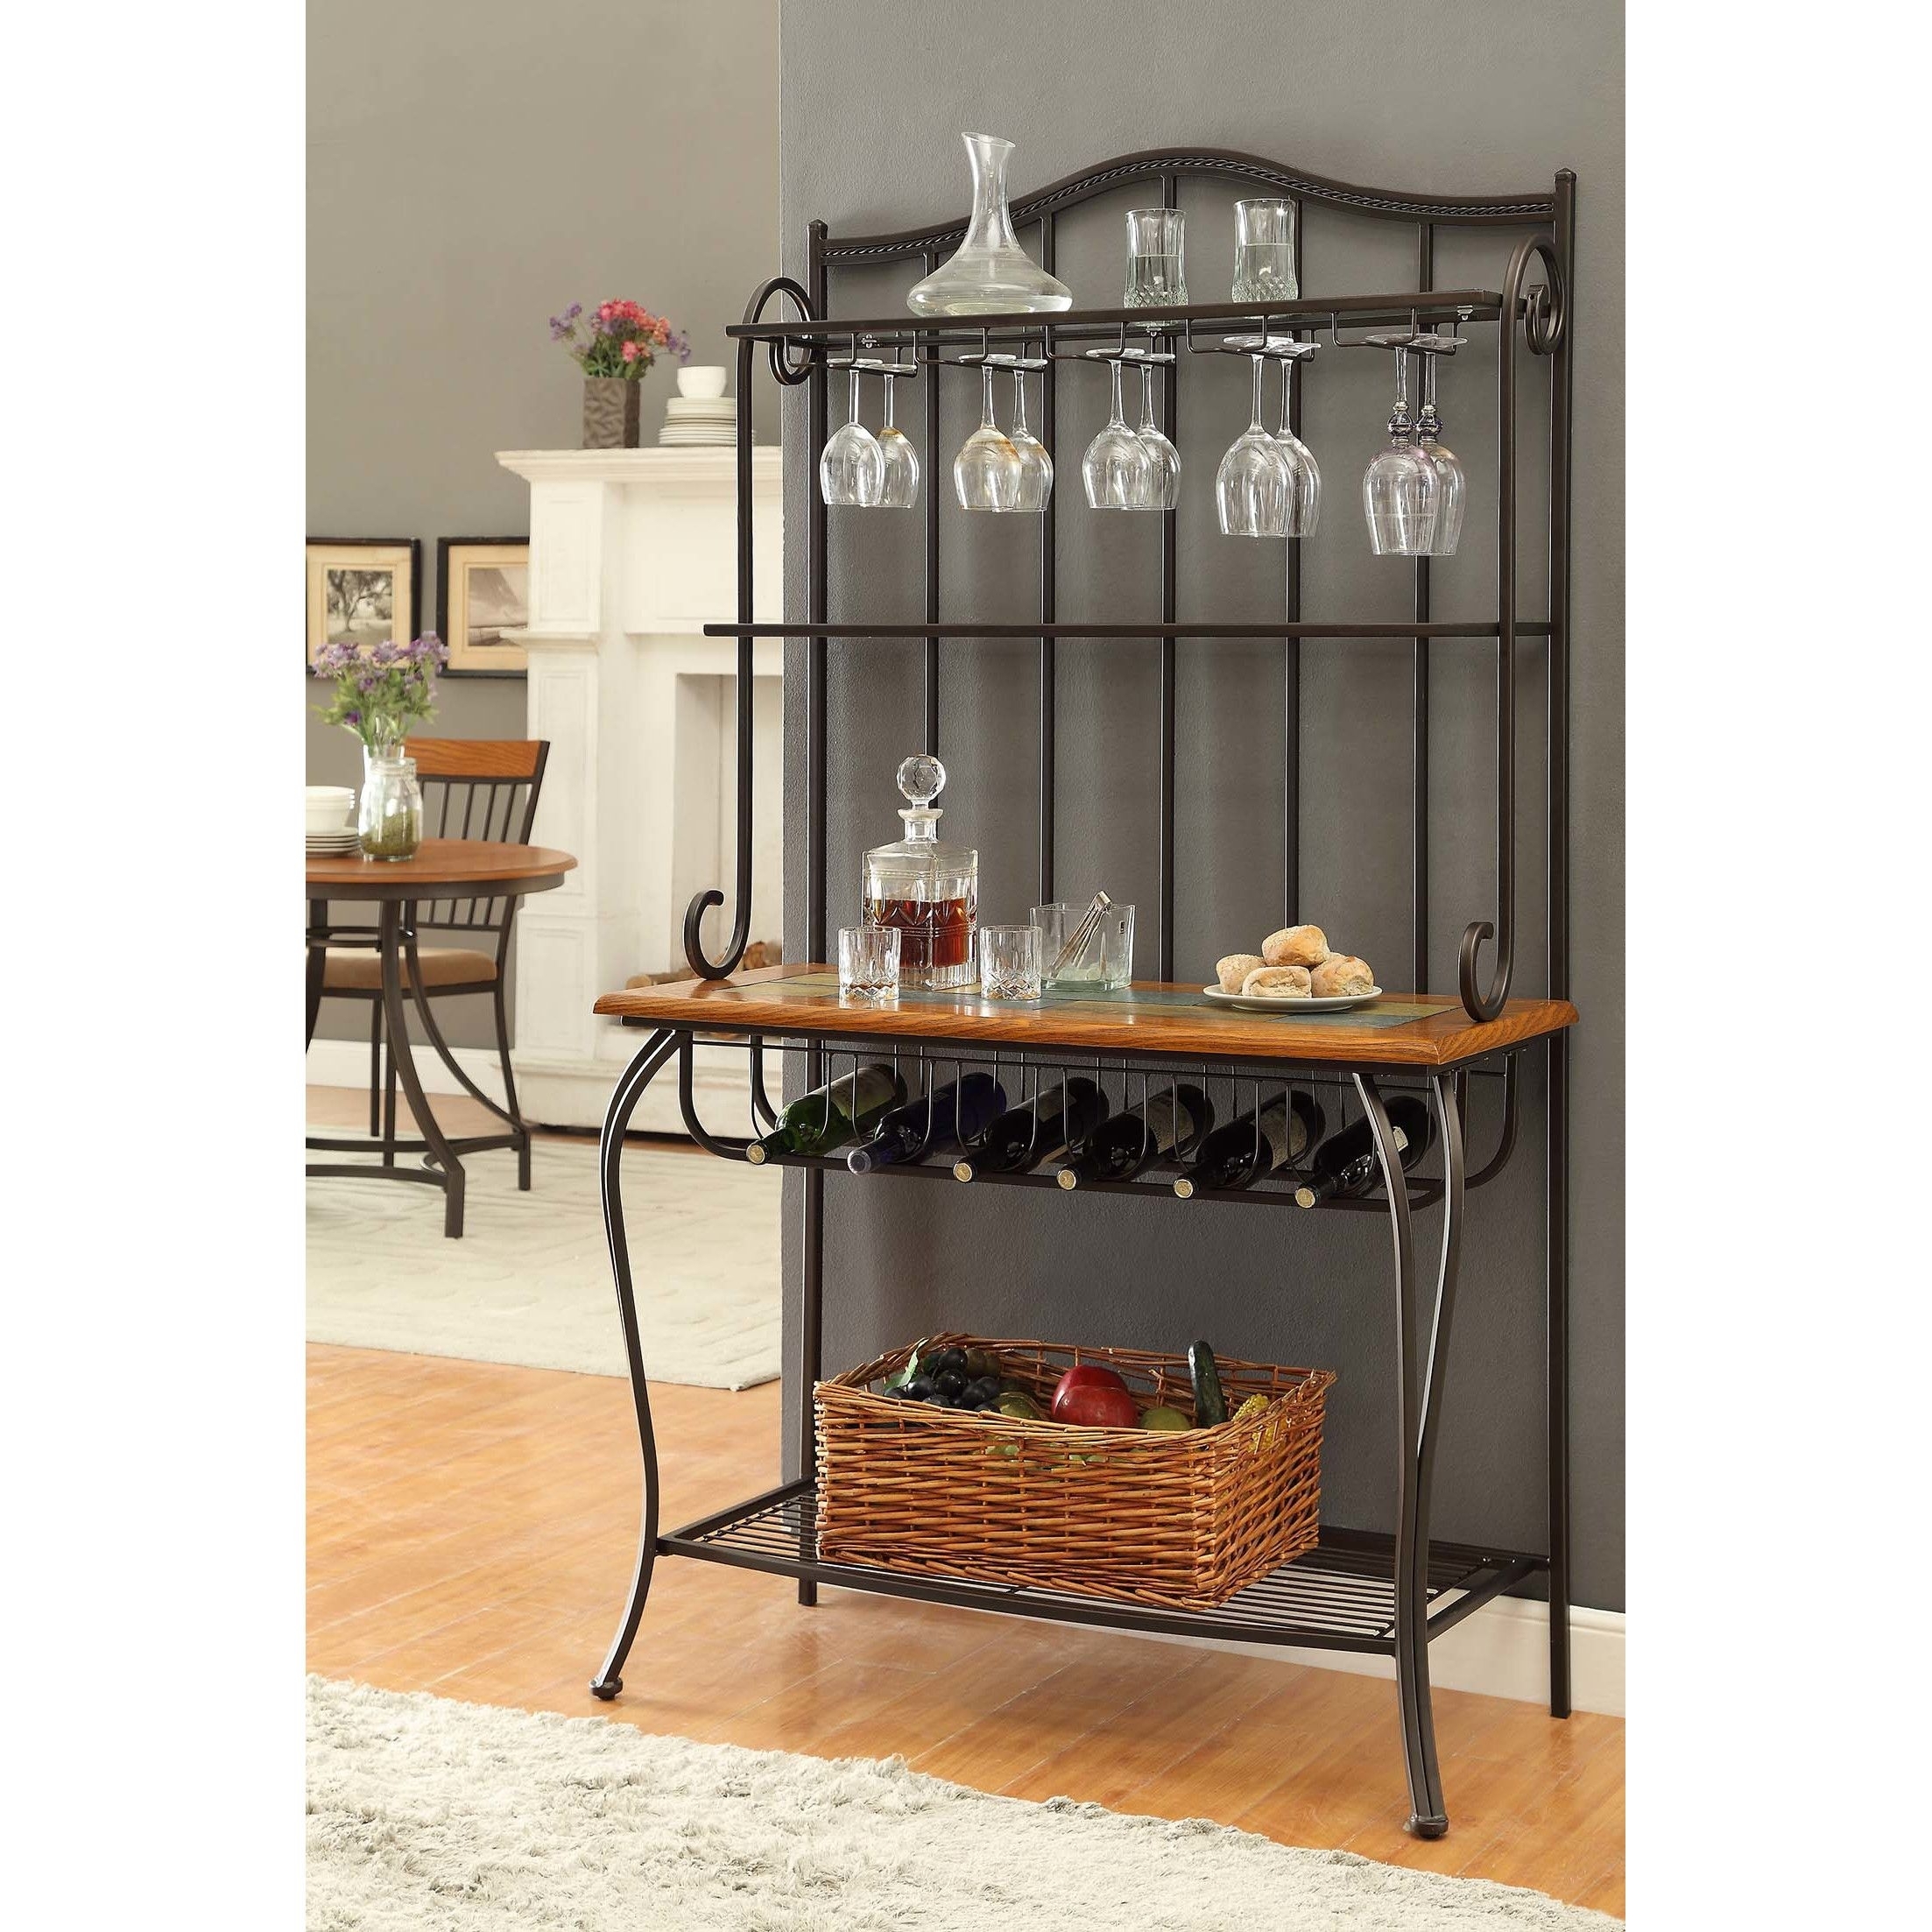 https://foter.com/photos/title/wrought-iron-bakers-rack-with-wine-rack.jpg